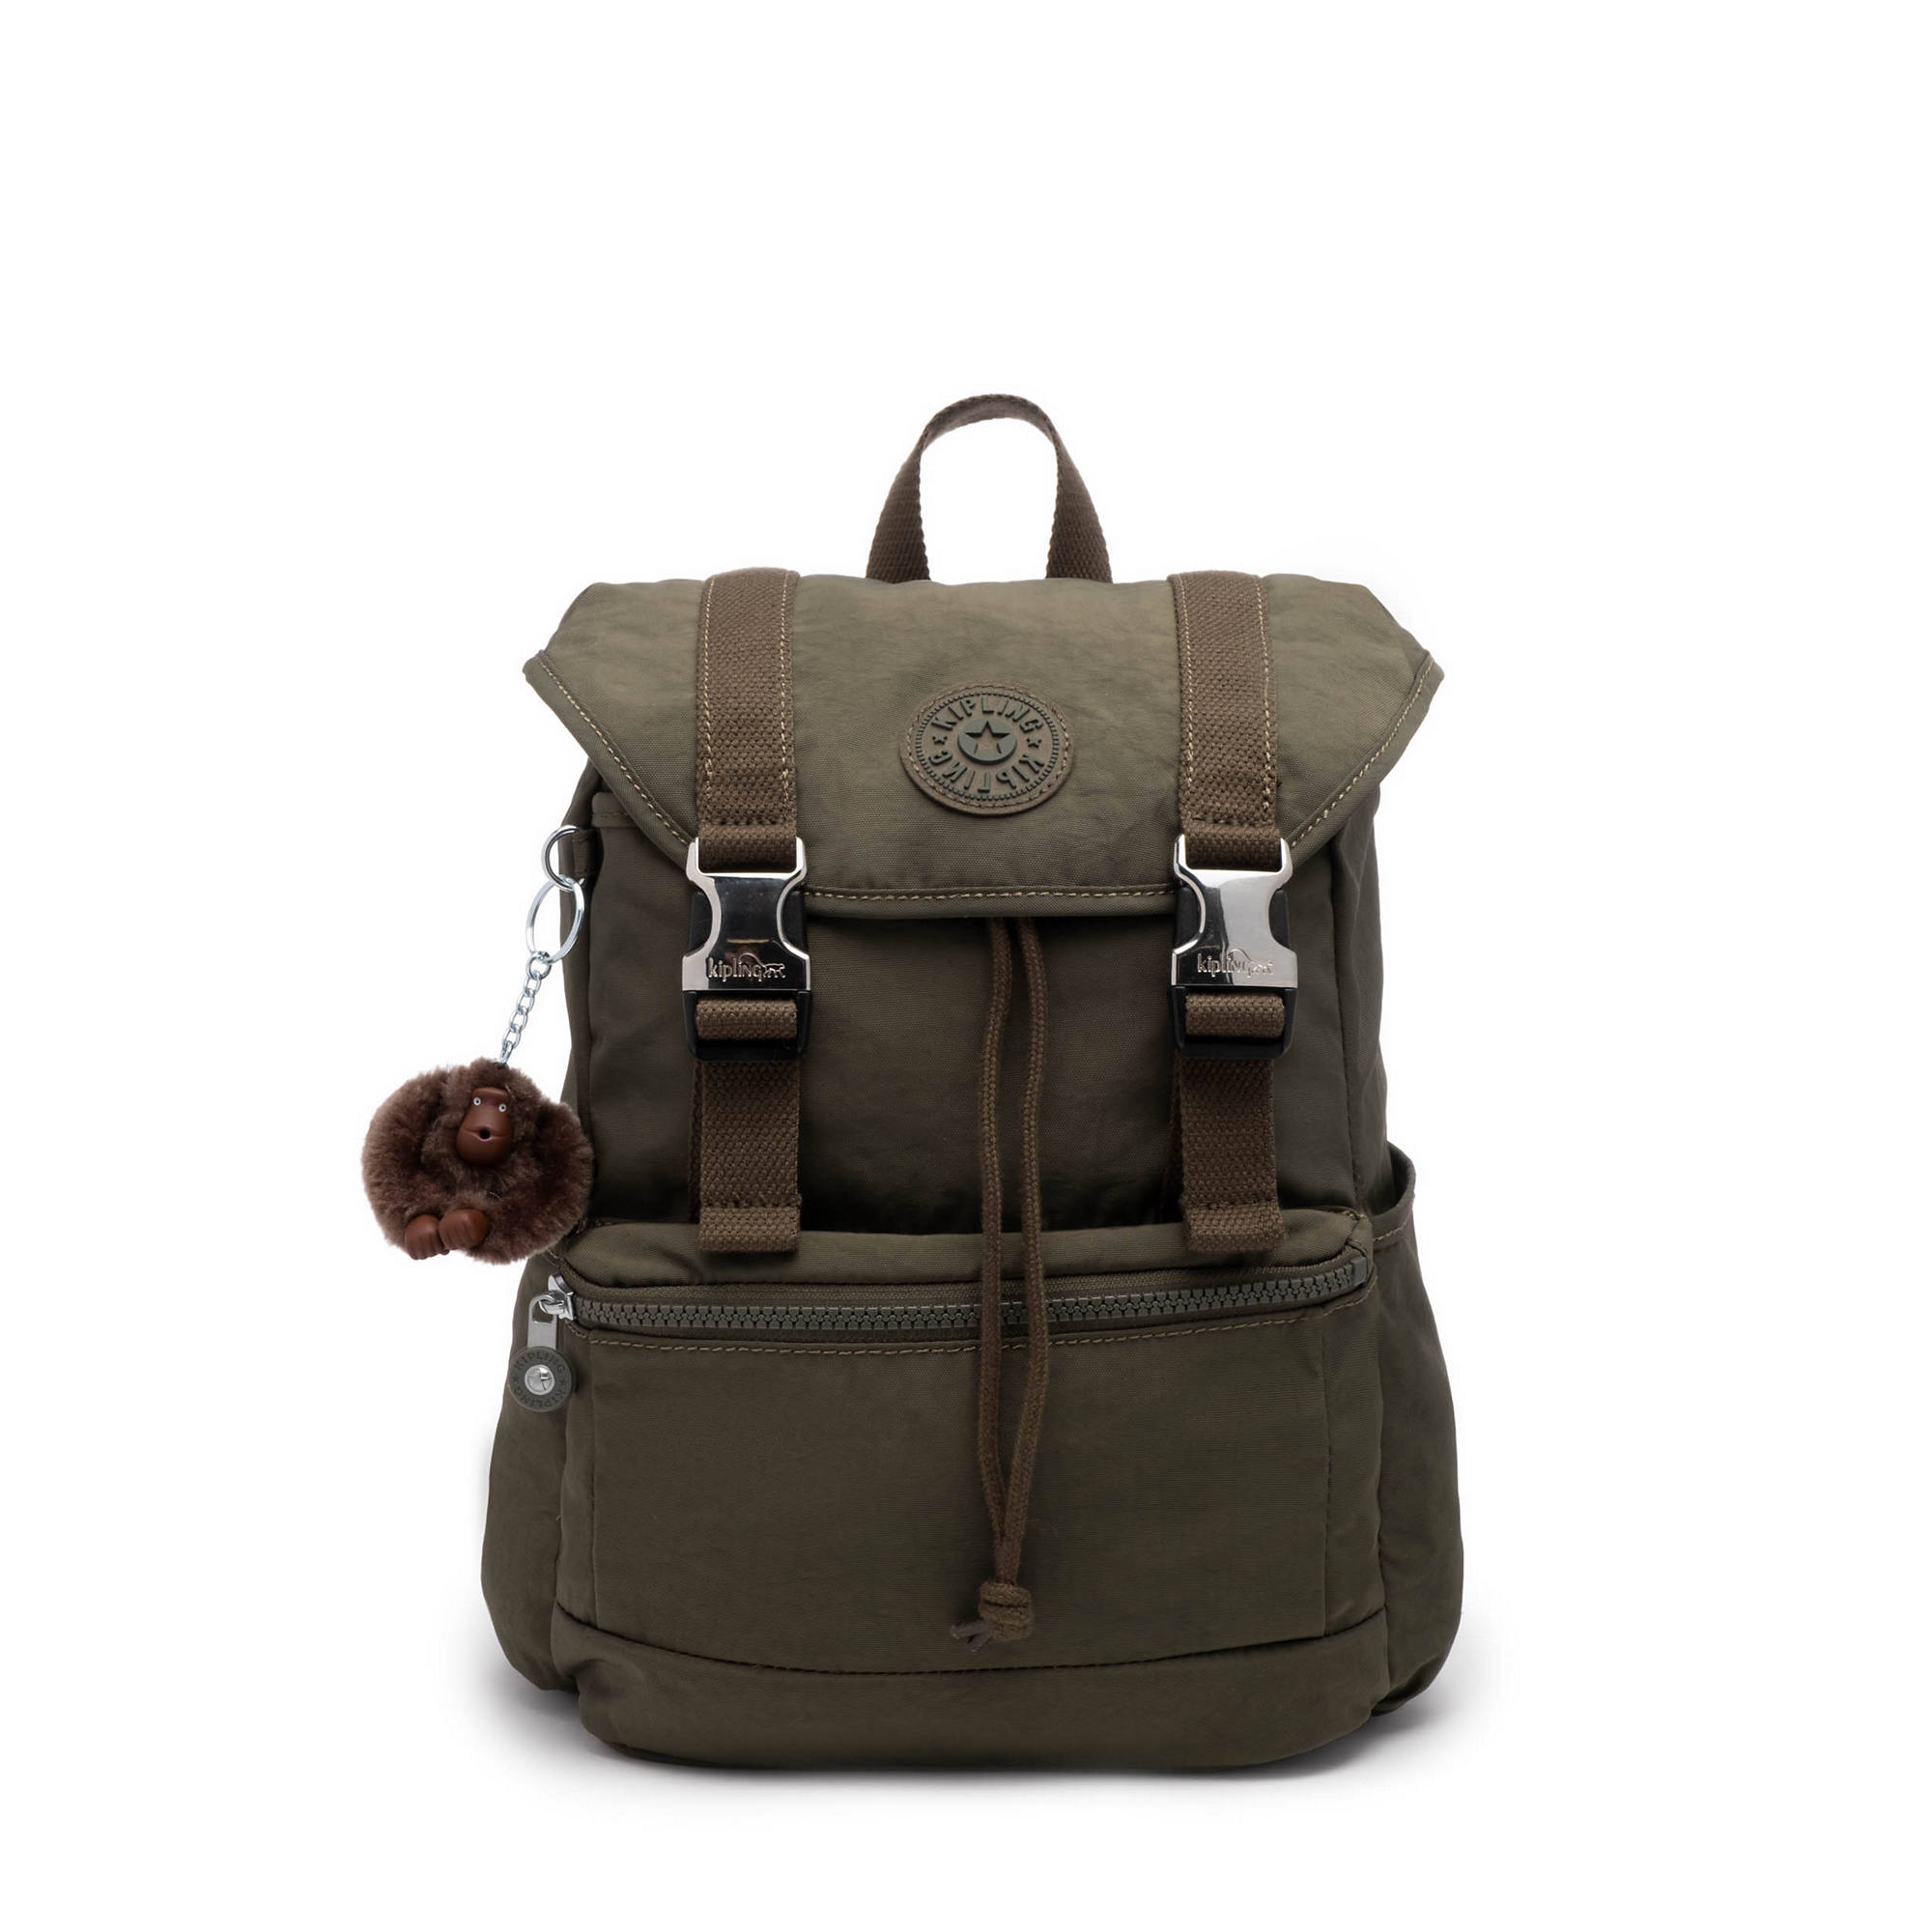 Experience Small Backpack | Kipling